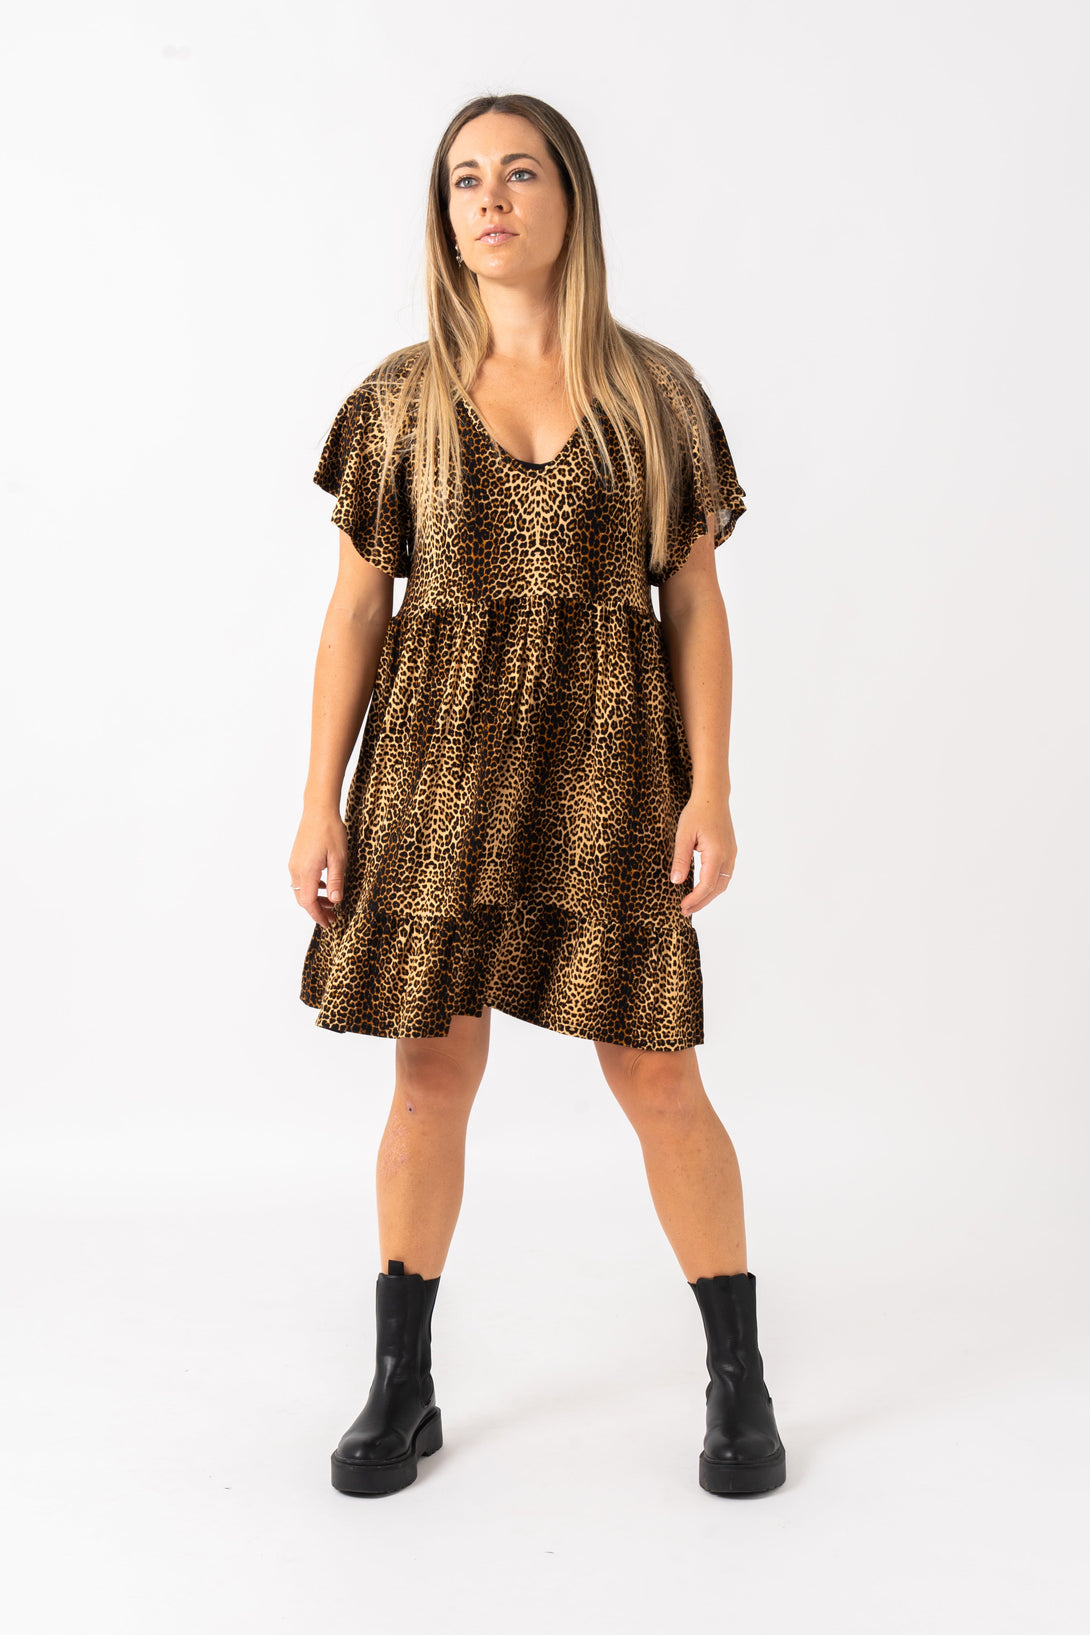 Jag Swag Slinky To Touch - Baby Doll V Neck Tiered Mini Dress-Activewear-Exoticathletica